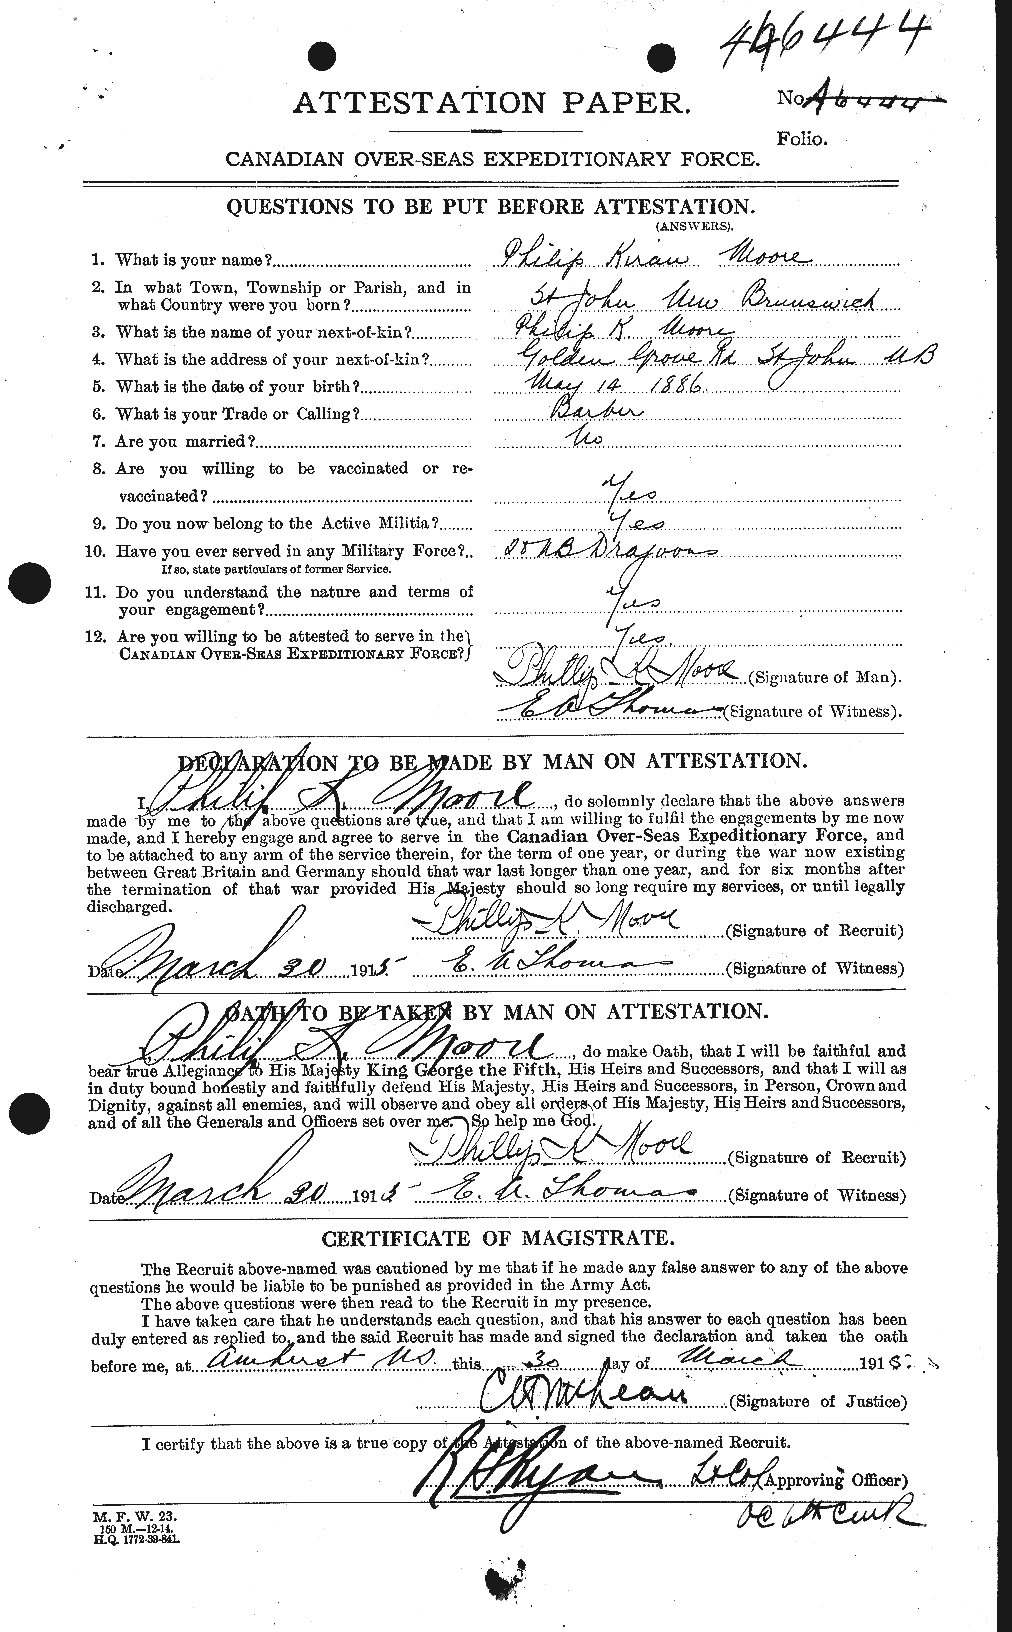 Personnel Records of the First World War - CEF 503501a